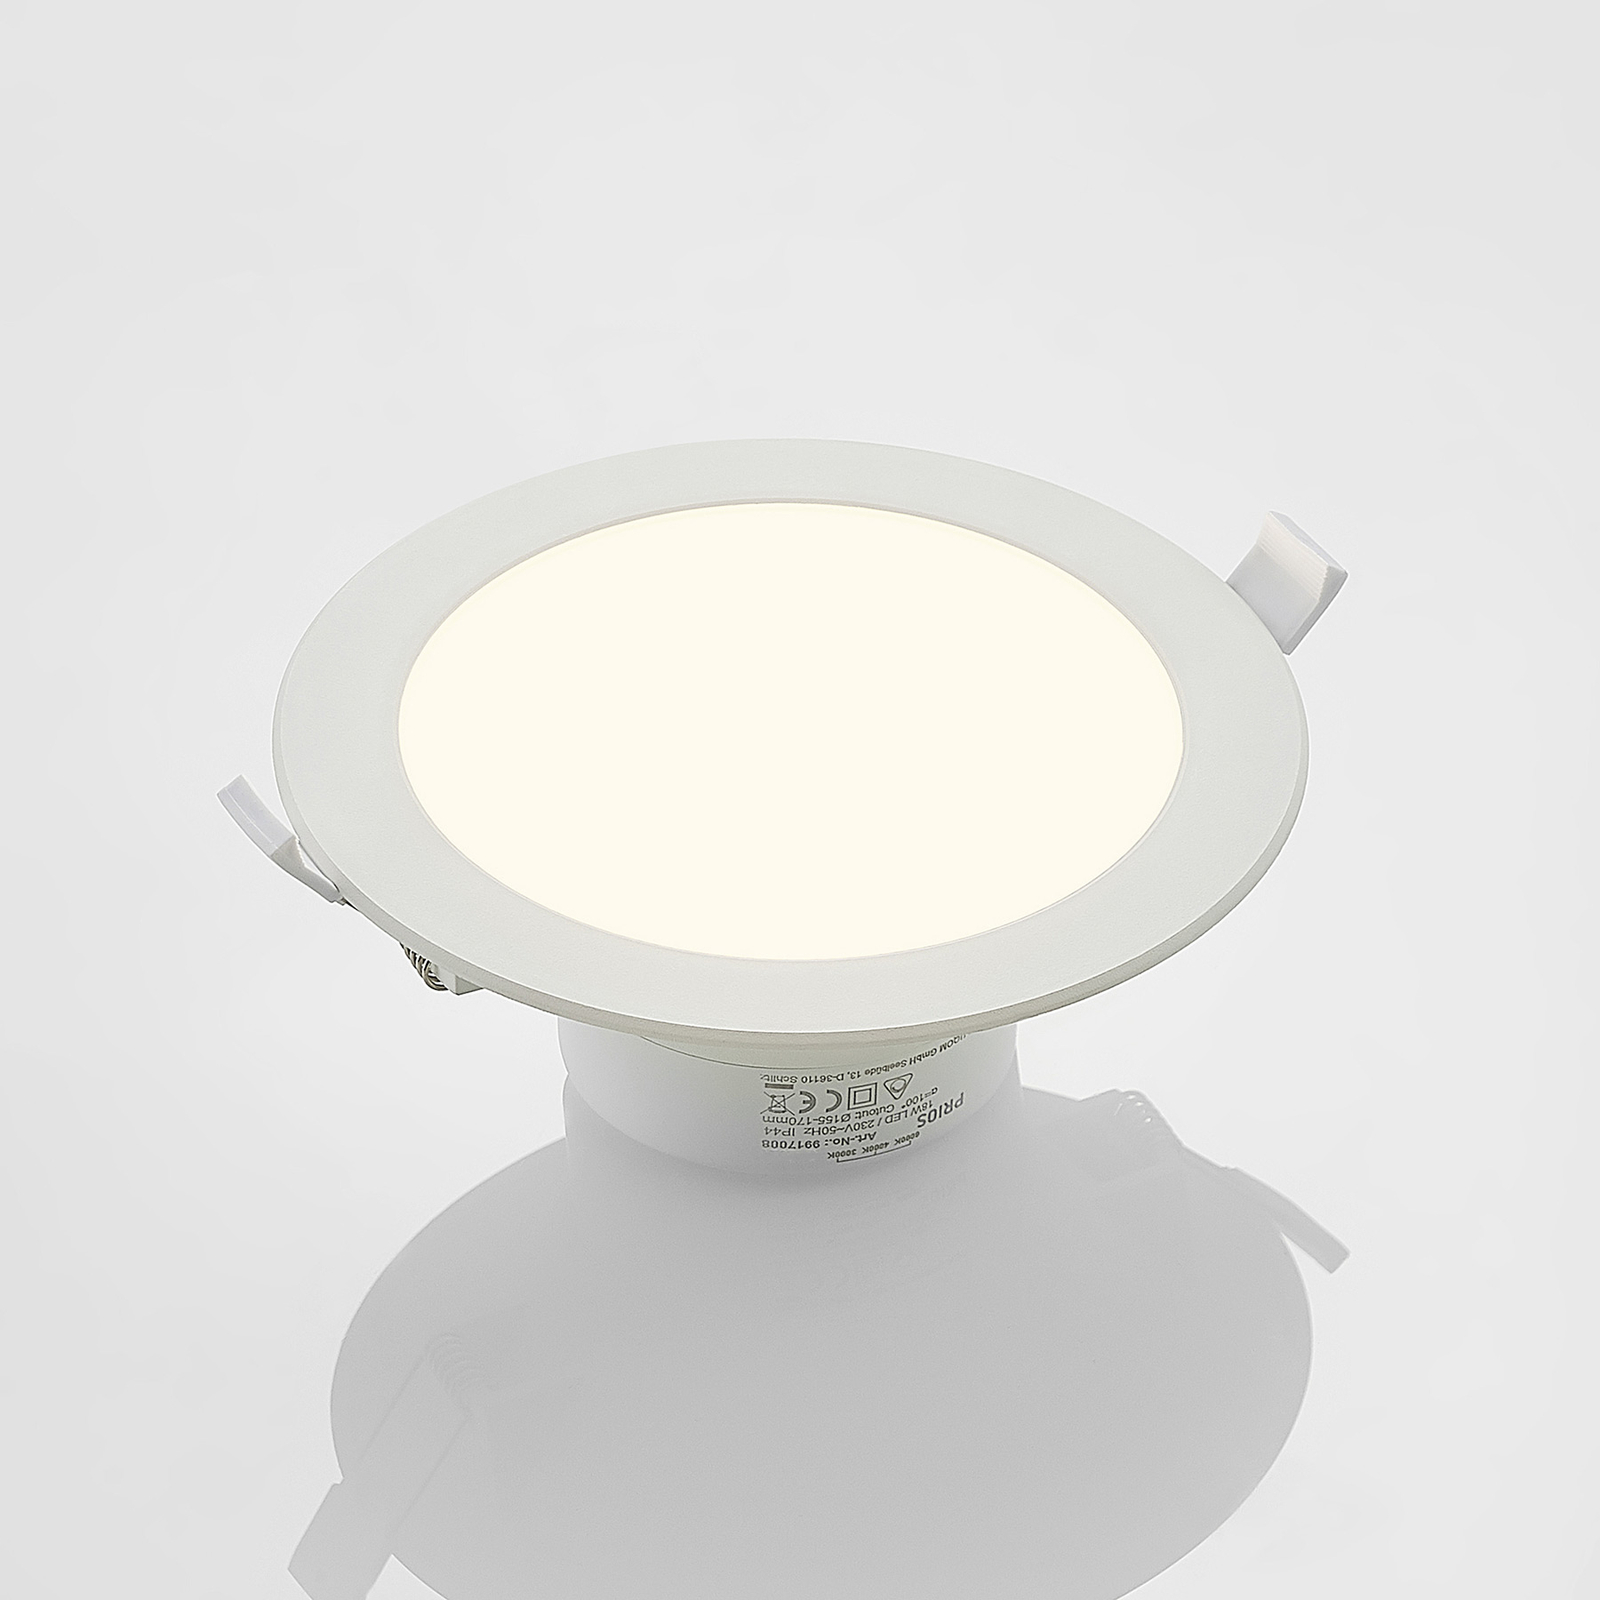 Prios LED recessed spotlight Rida, 19 cm, 18 W, CCT, dimmable